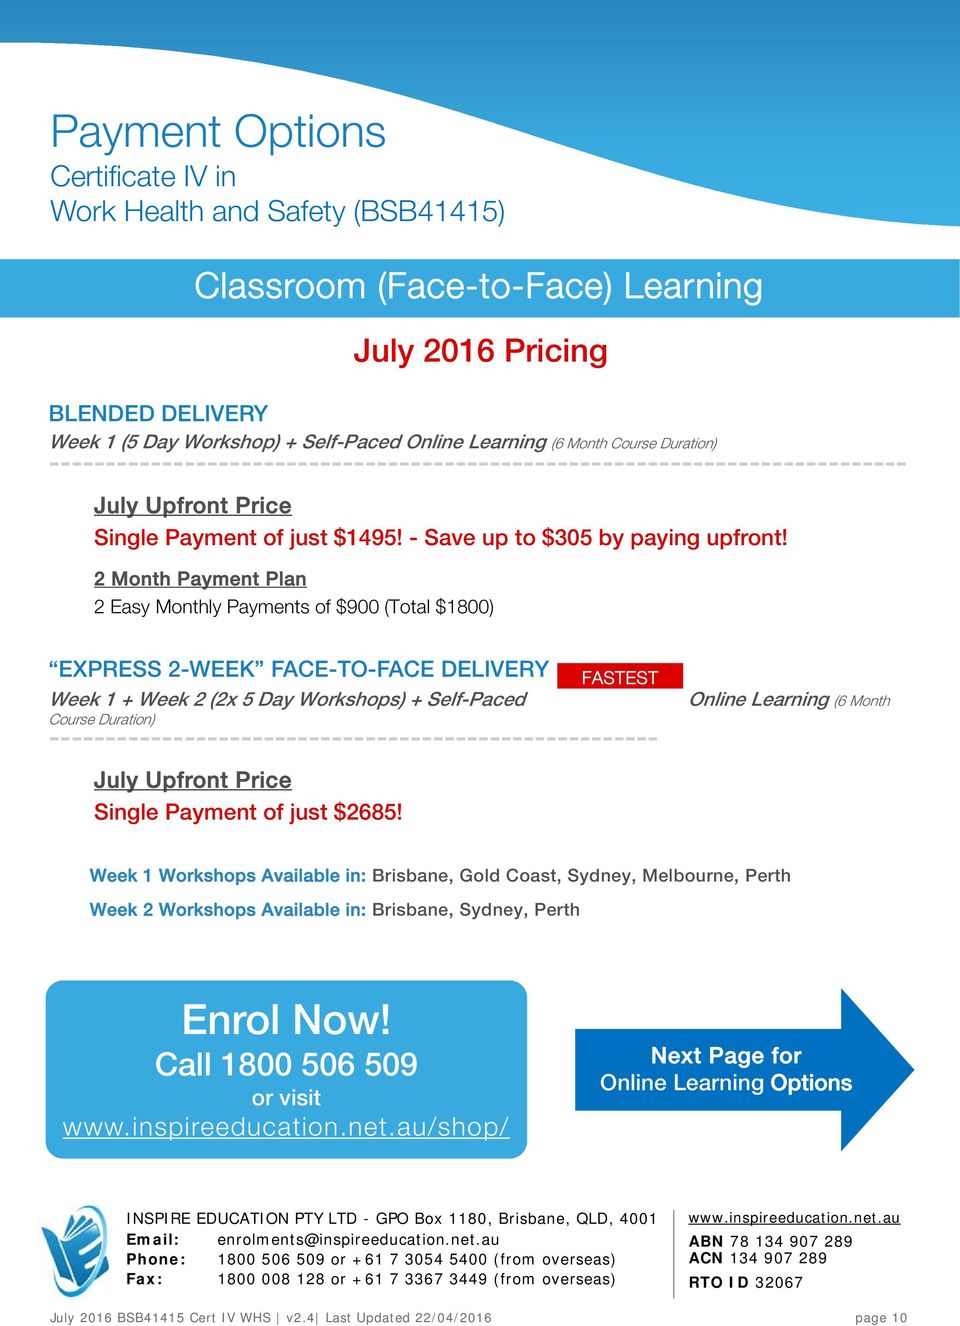 2 Month Payment Plan July 2016 Pricing 2 Easy Monthly Payments of $900 (Total $1800) EXPRESS 2-WEEK FACE-TO-FACE DELIVERY Week 1 + Week 2 (2x 5 Day Workshops) + Self-Paced Course Duration)